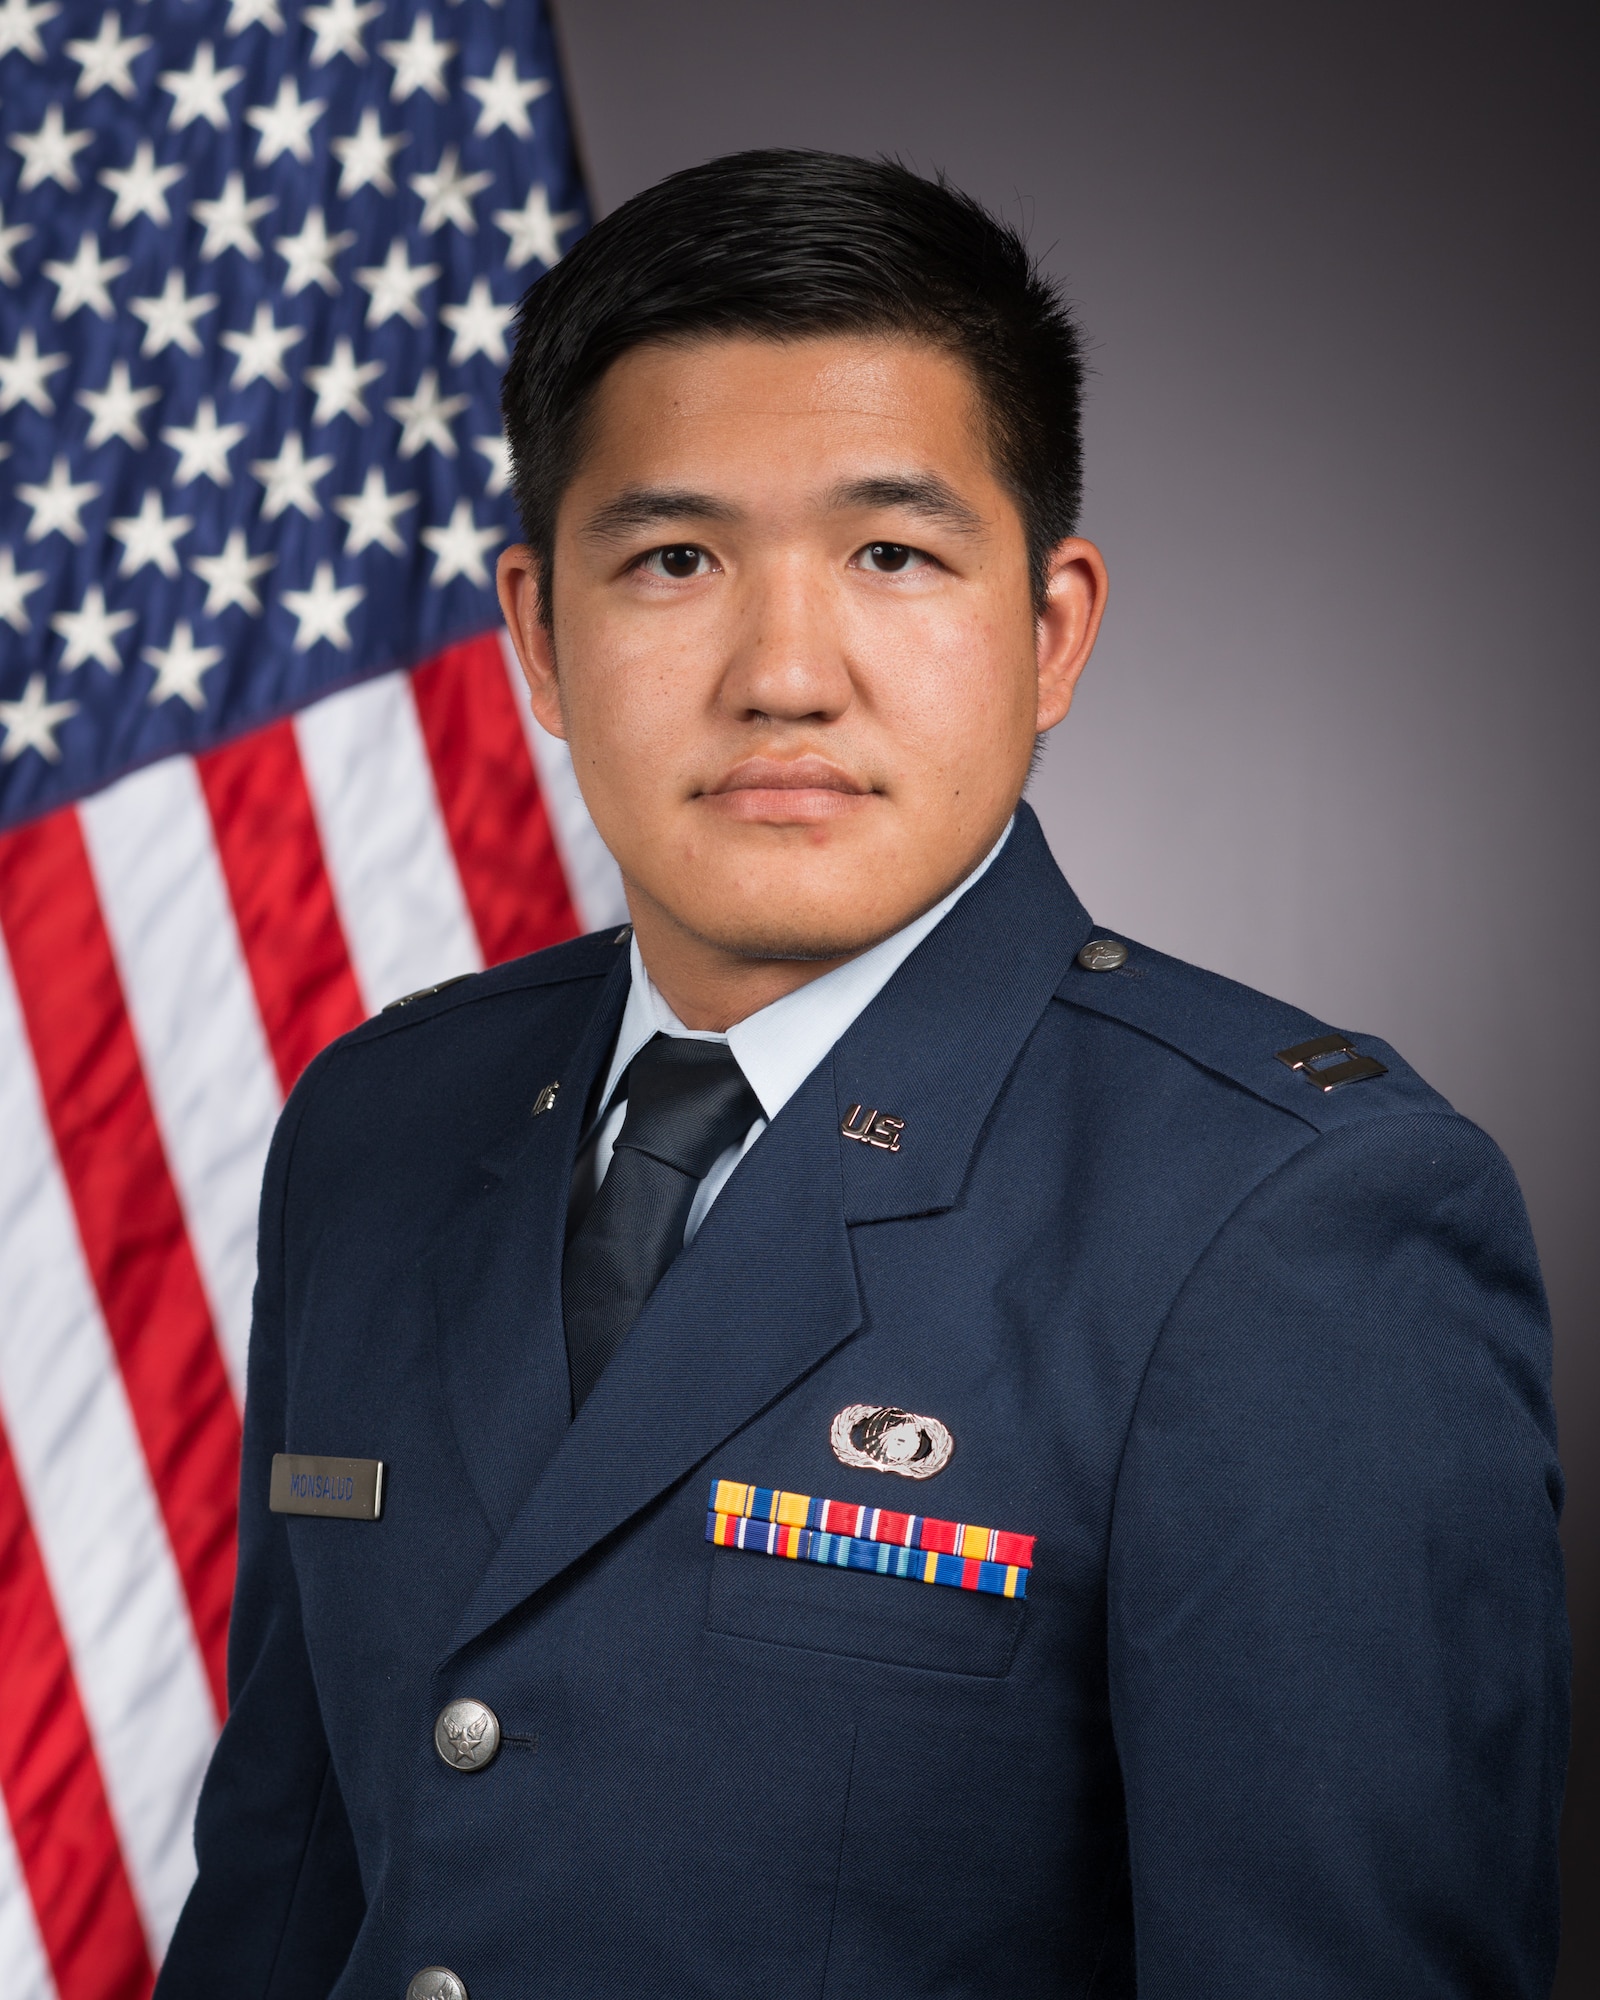 Capt. Dharyl Monsalud, deputy chief of the AFRL Aerospace Systems Directorate Combustion Devices Branch, received the Technical/Research/Business Achievement award from the Society of Asian Scientists and Engineers for his work in space technologies. (U.S. Air Force photo)